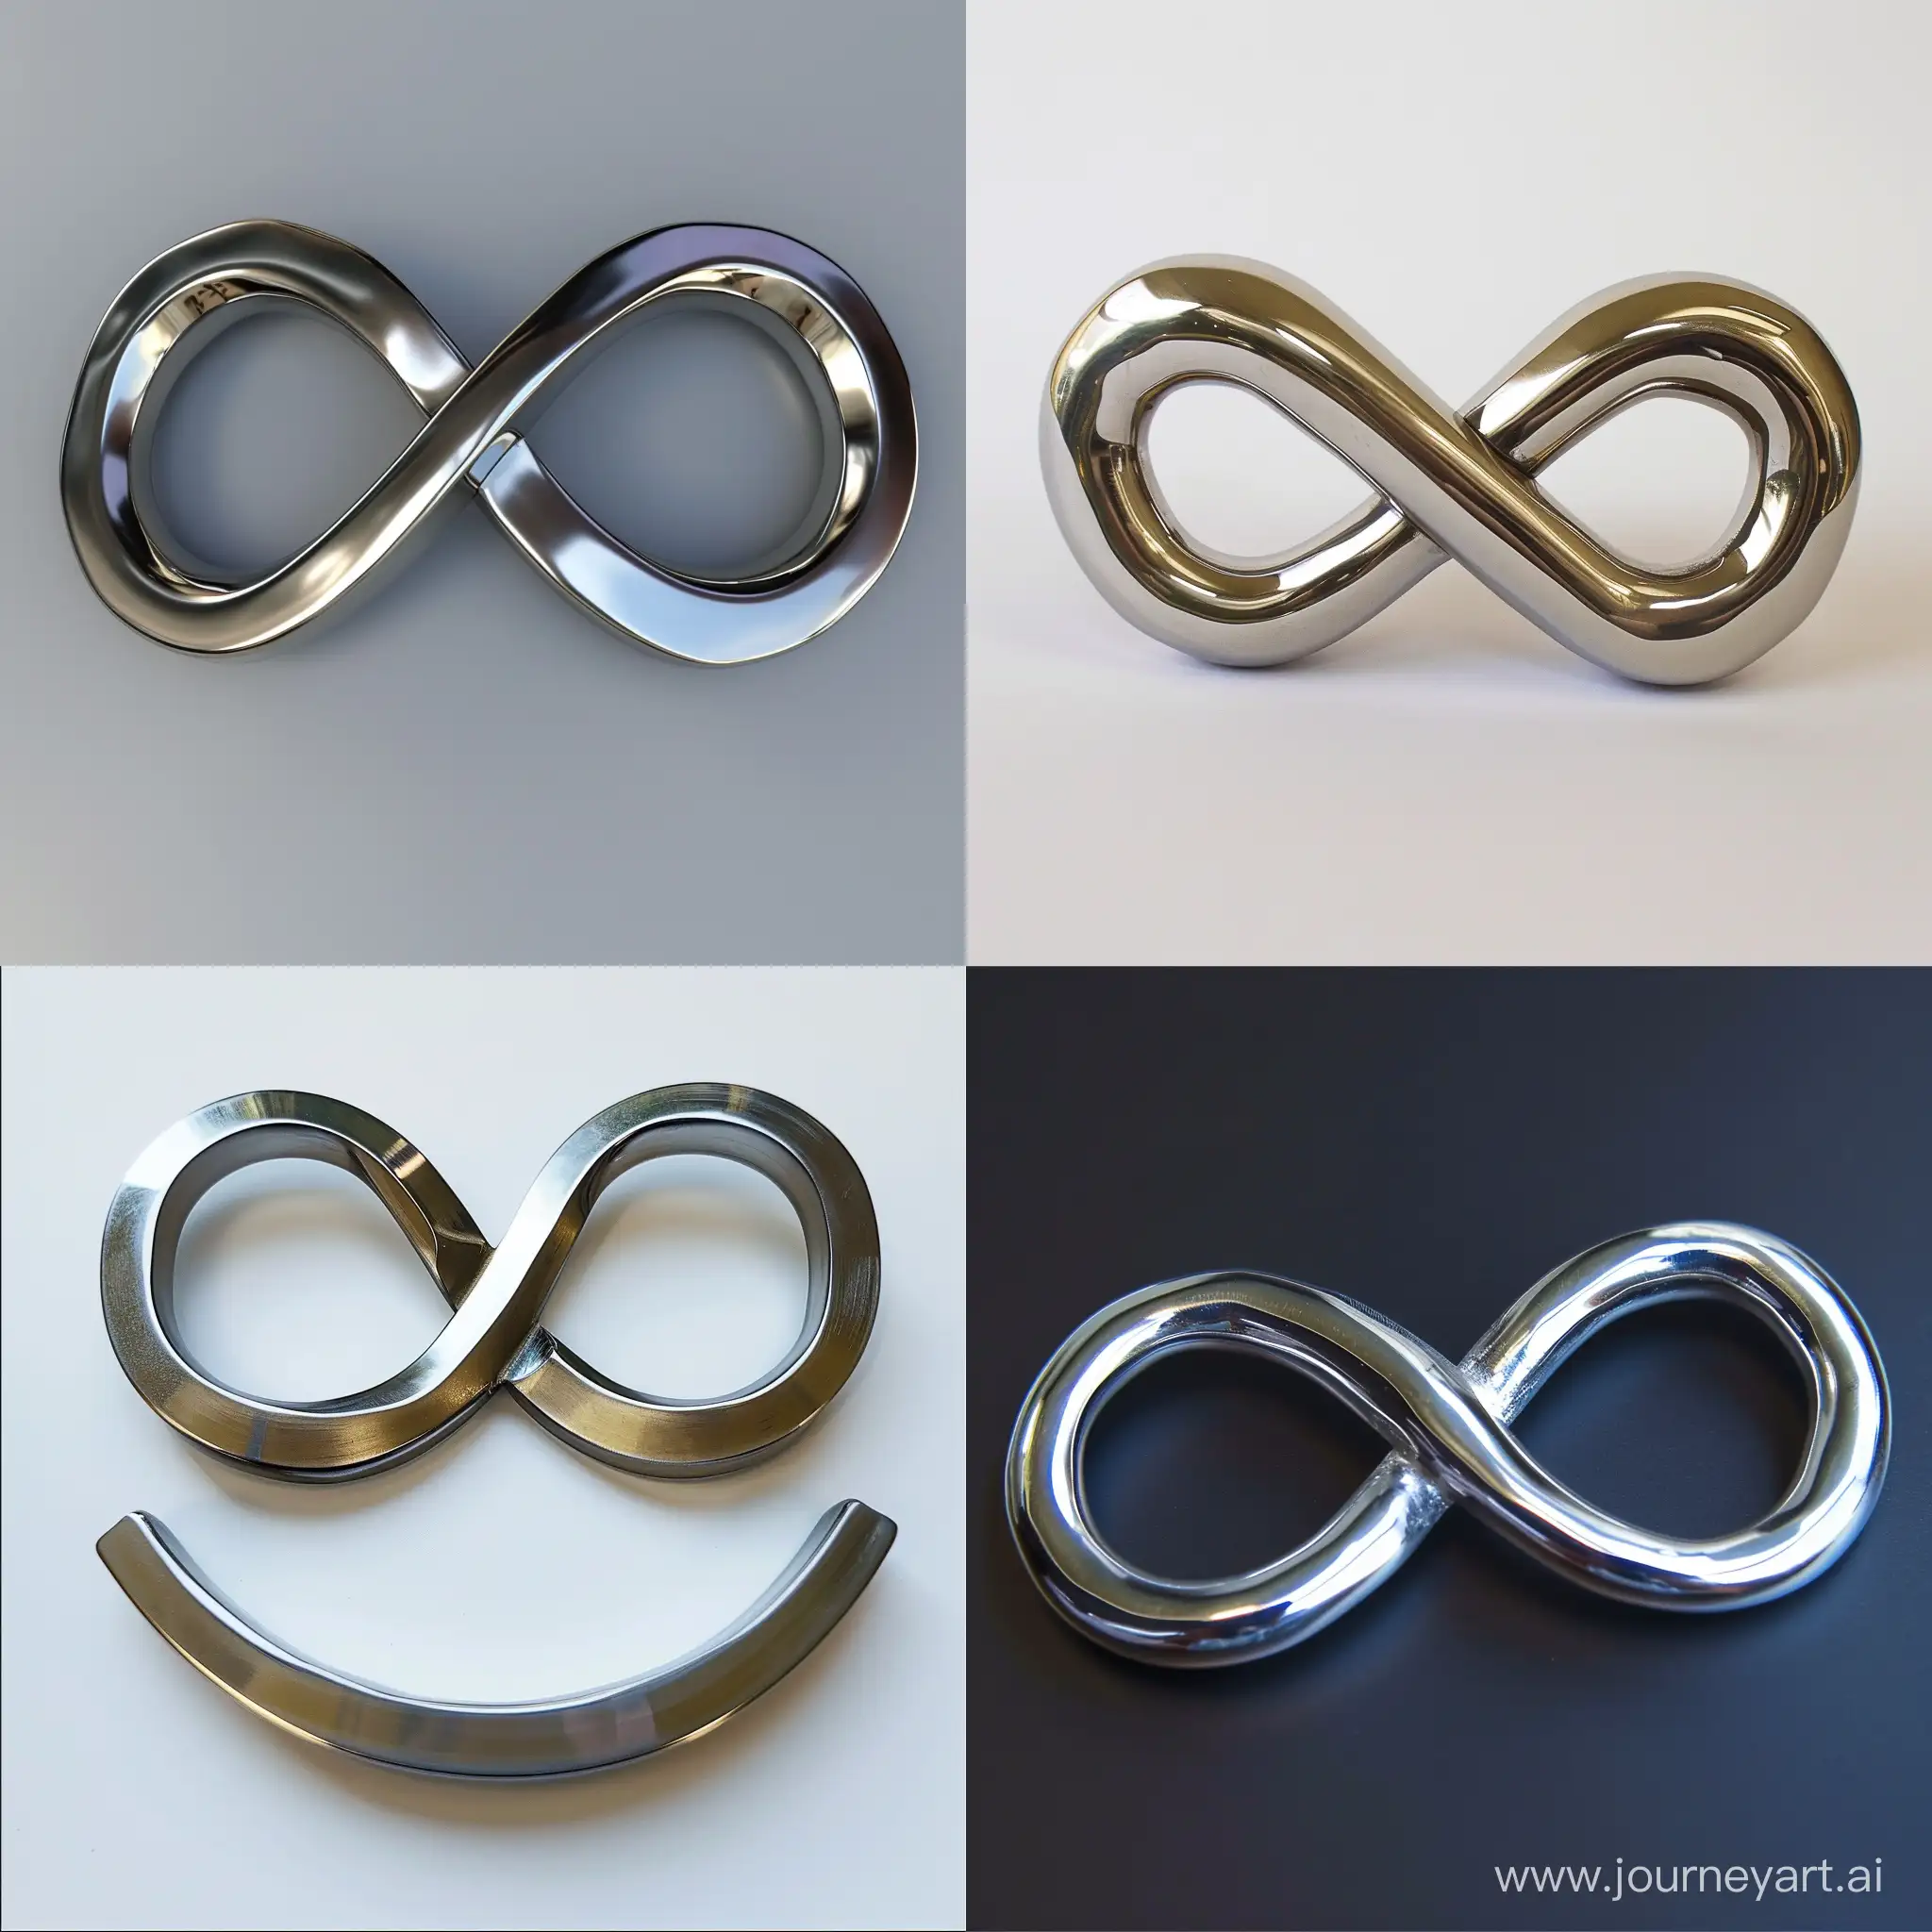 infinity symbol made from stainless steel